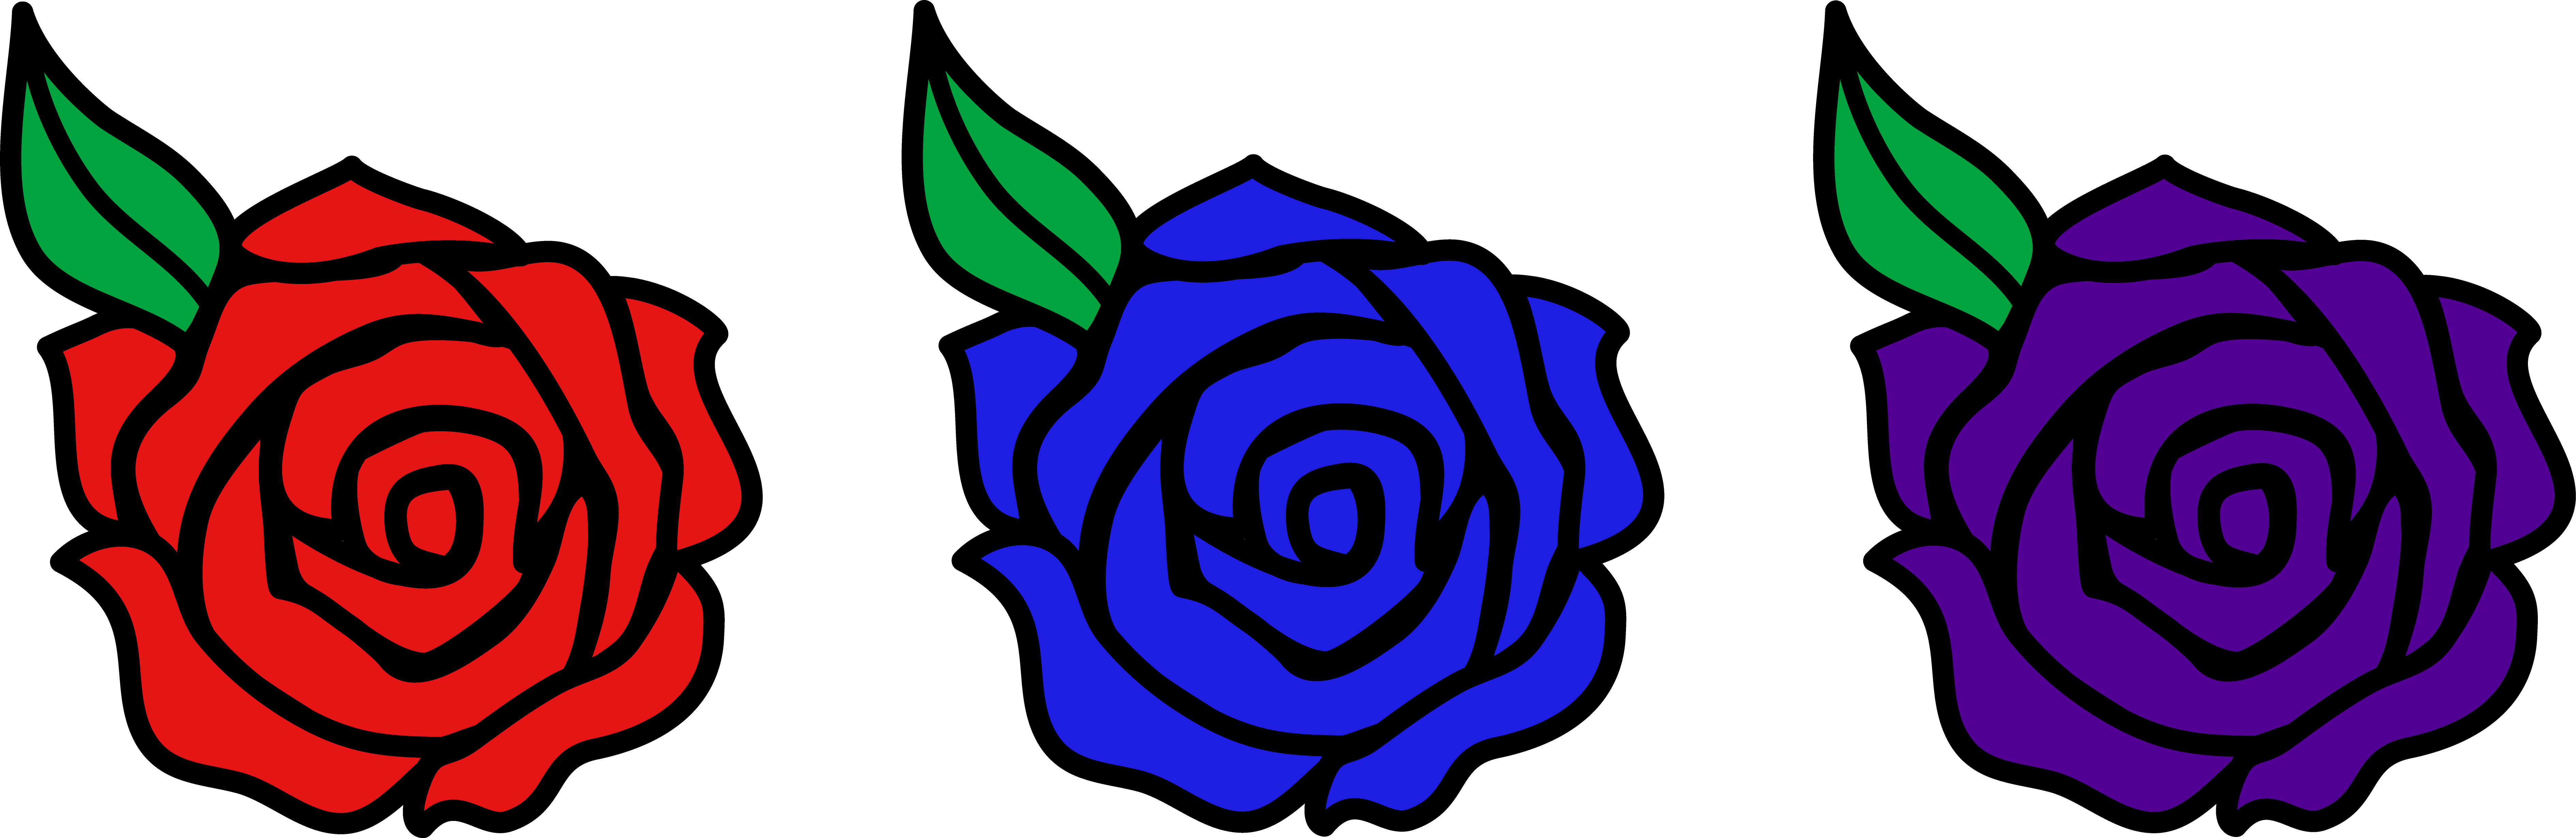 Cartoon Rose Flower Images & Pictures - Becuo